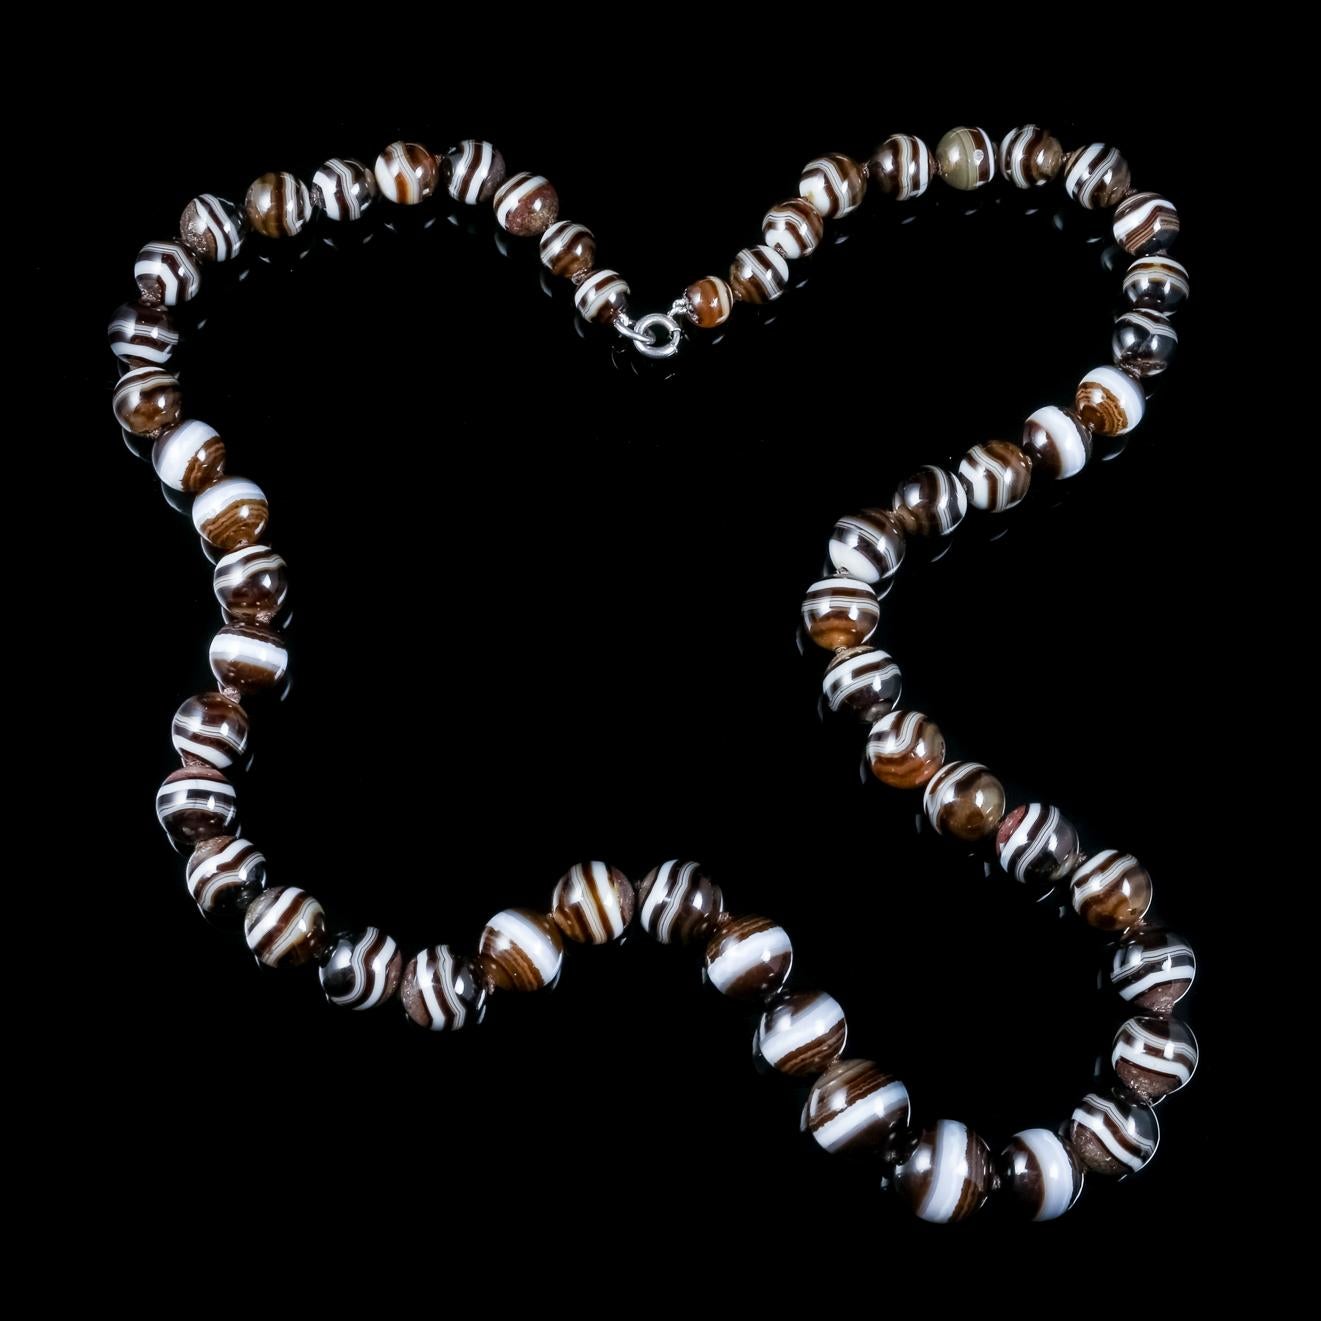 An exquisite antique Victorian necklace made up of lovely Bullseye Agate beads Which graduate in size from the clasp down. 

The Agates are a wonderful dark black/ brown colour and known as Bullseye Agates for their multiple white bands which are